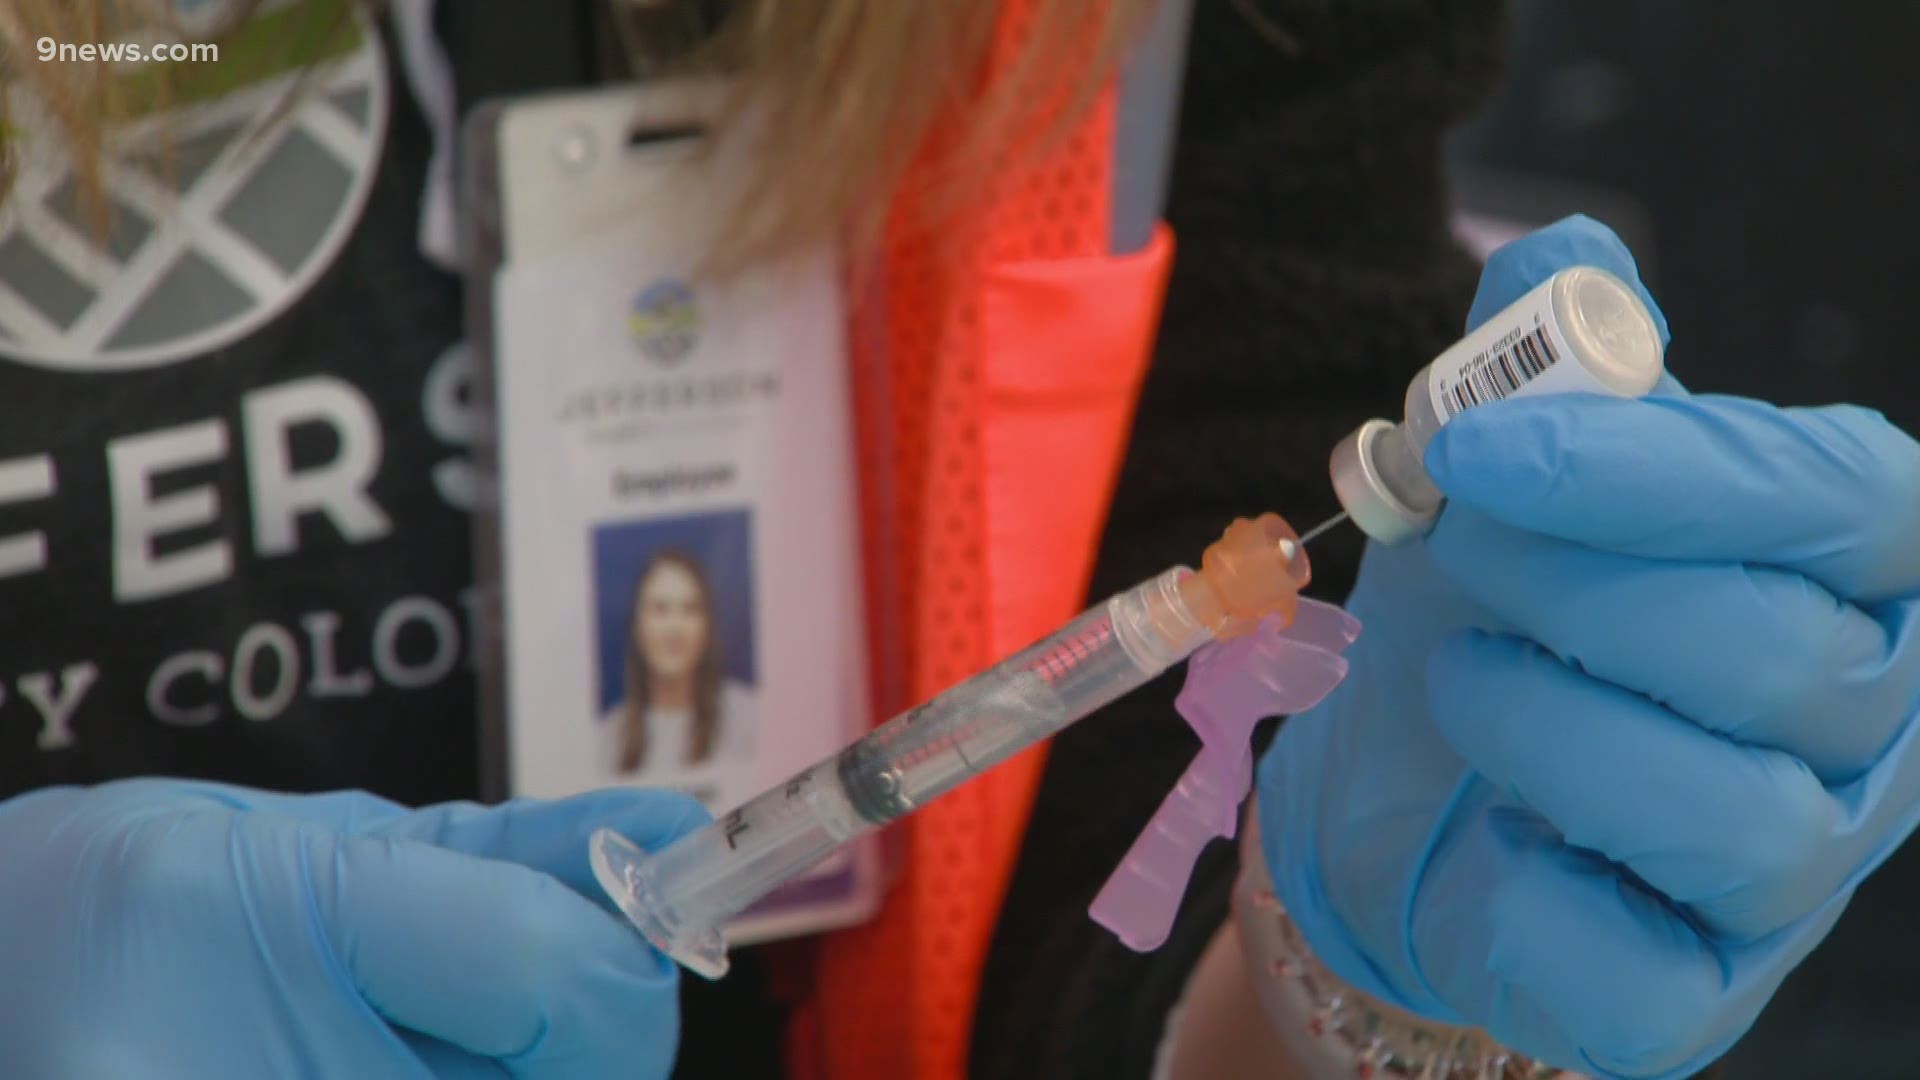 The governor said that it is projected that any Coloradans who want a vaccine will be able to get it by mid to late May.